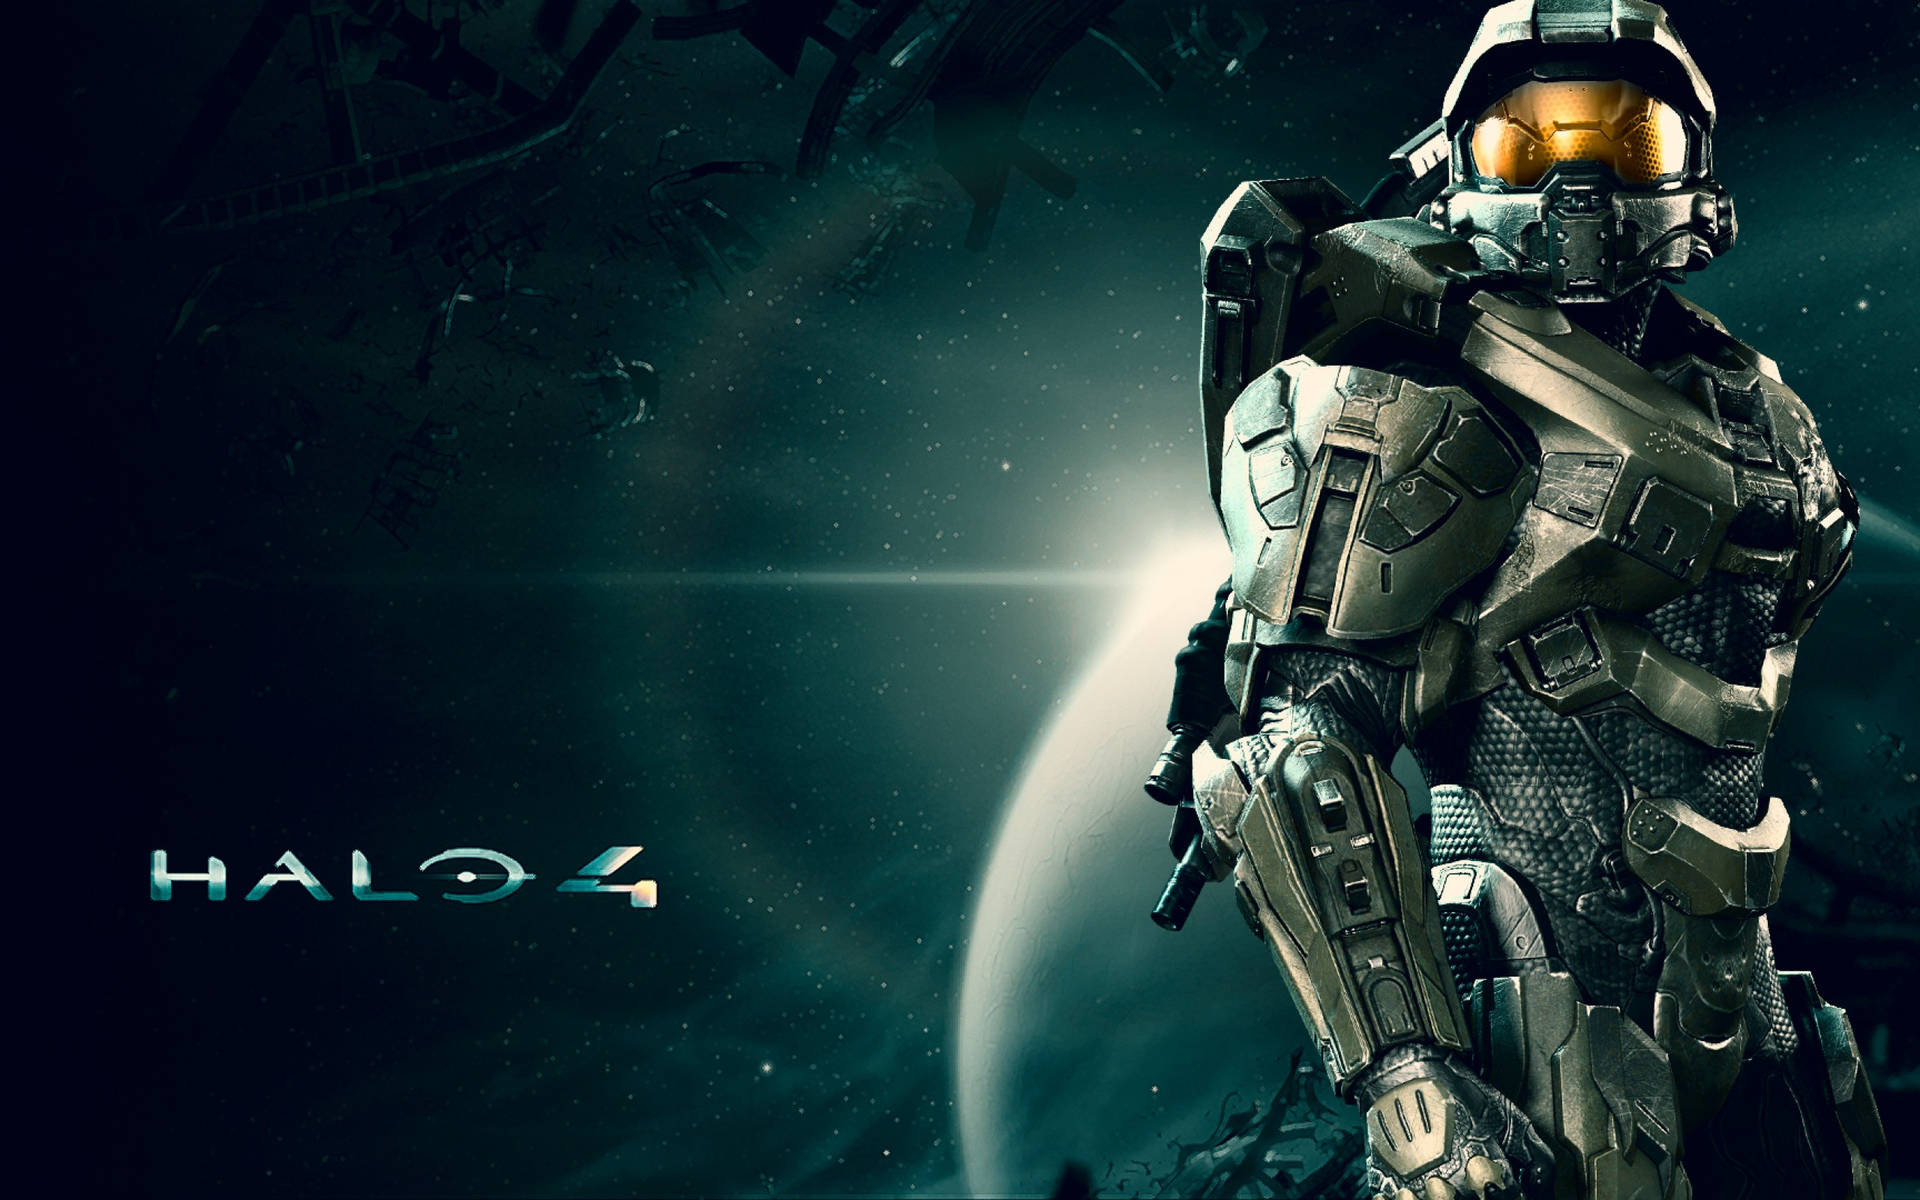 Halo 4 Video Game Cover Art Background